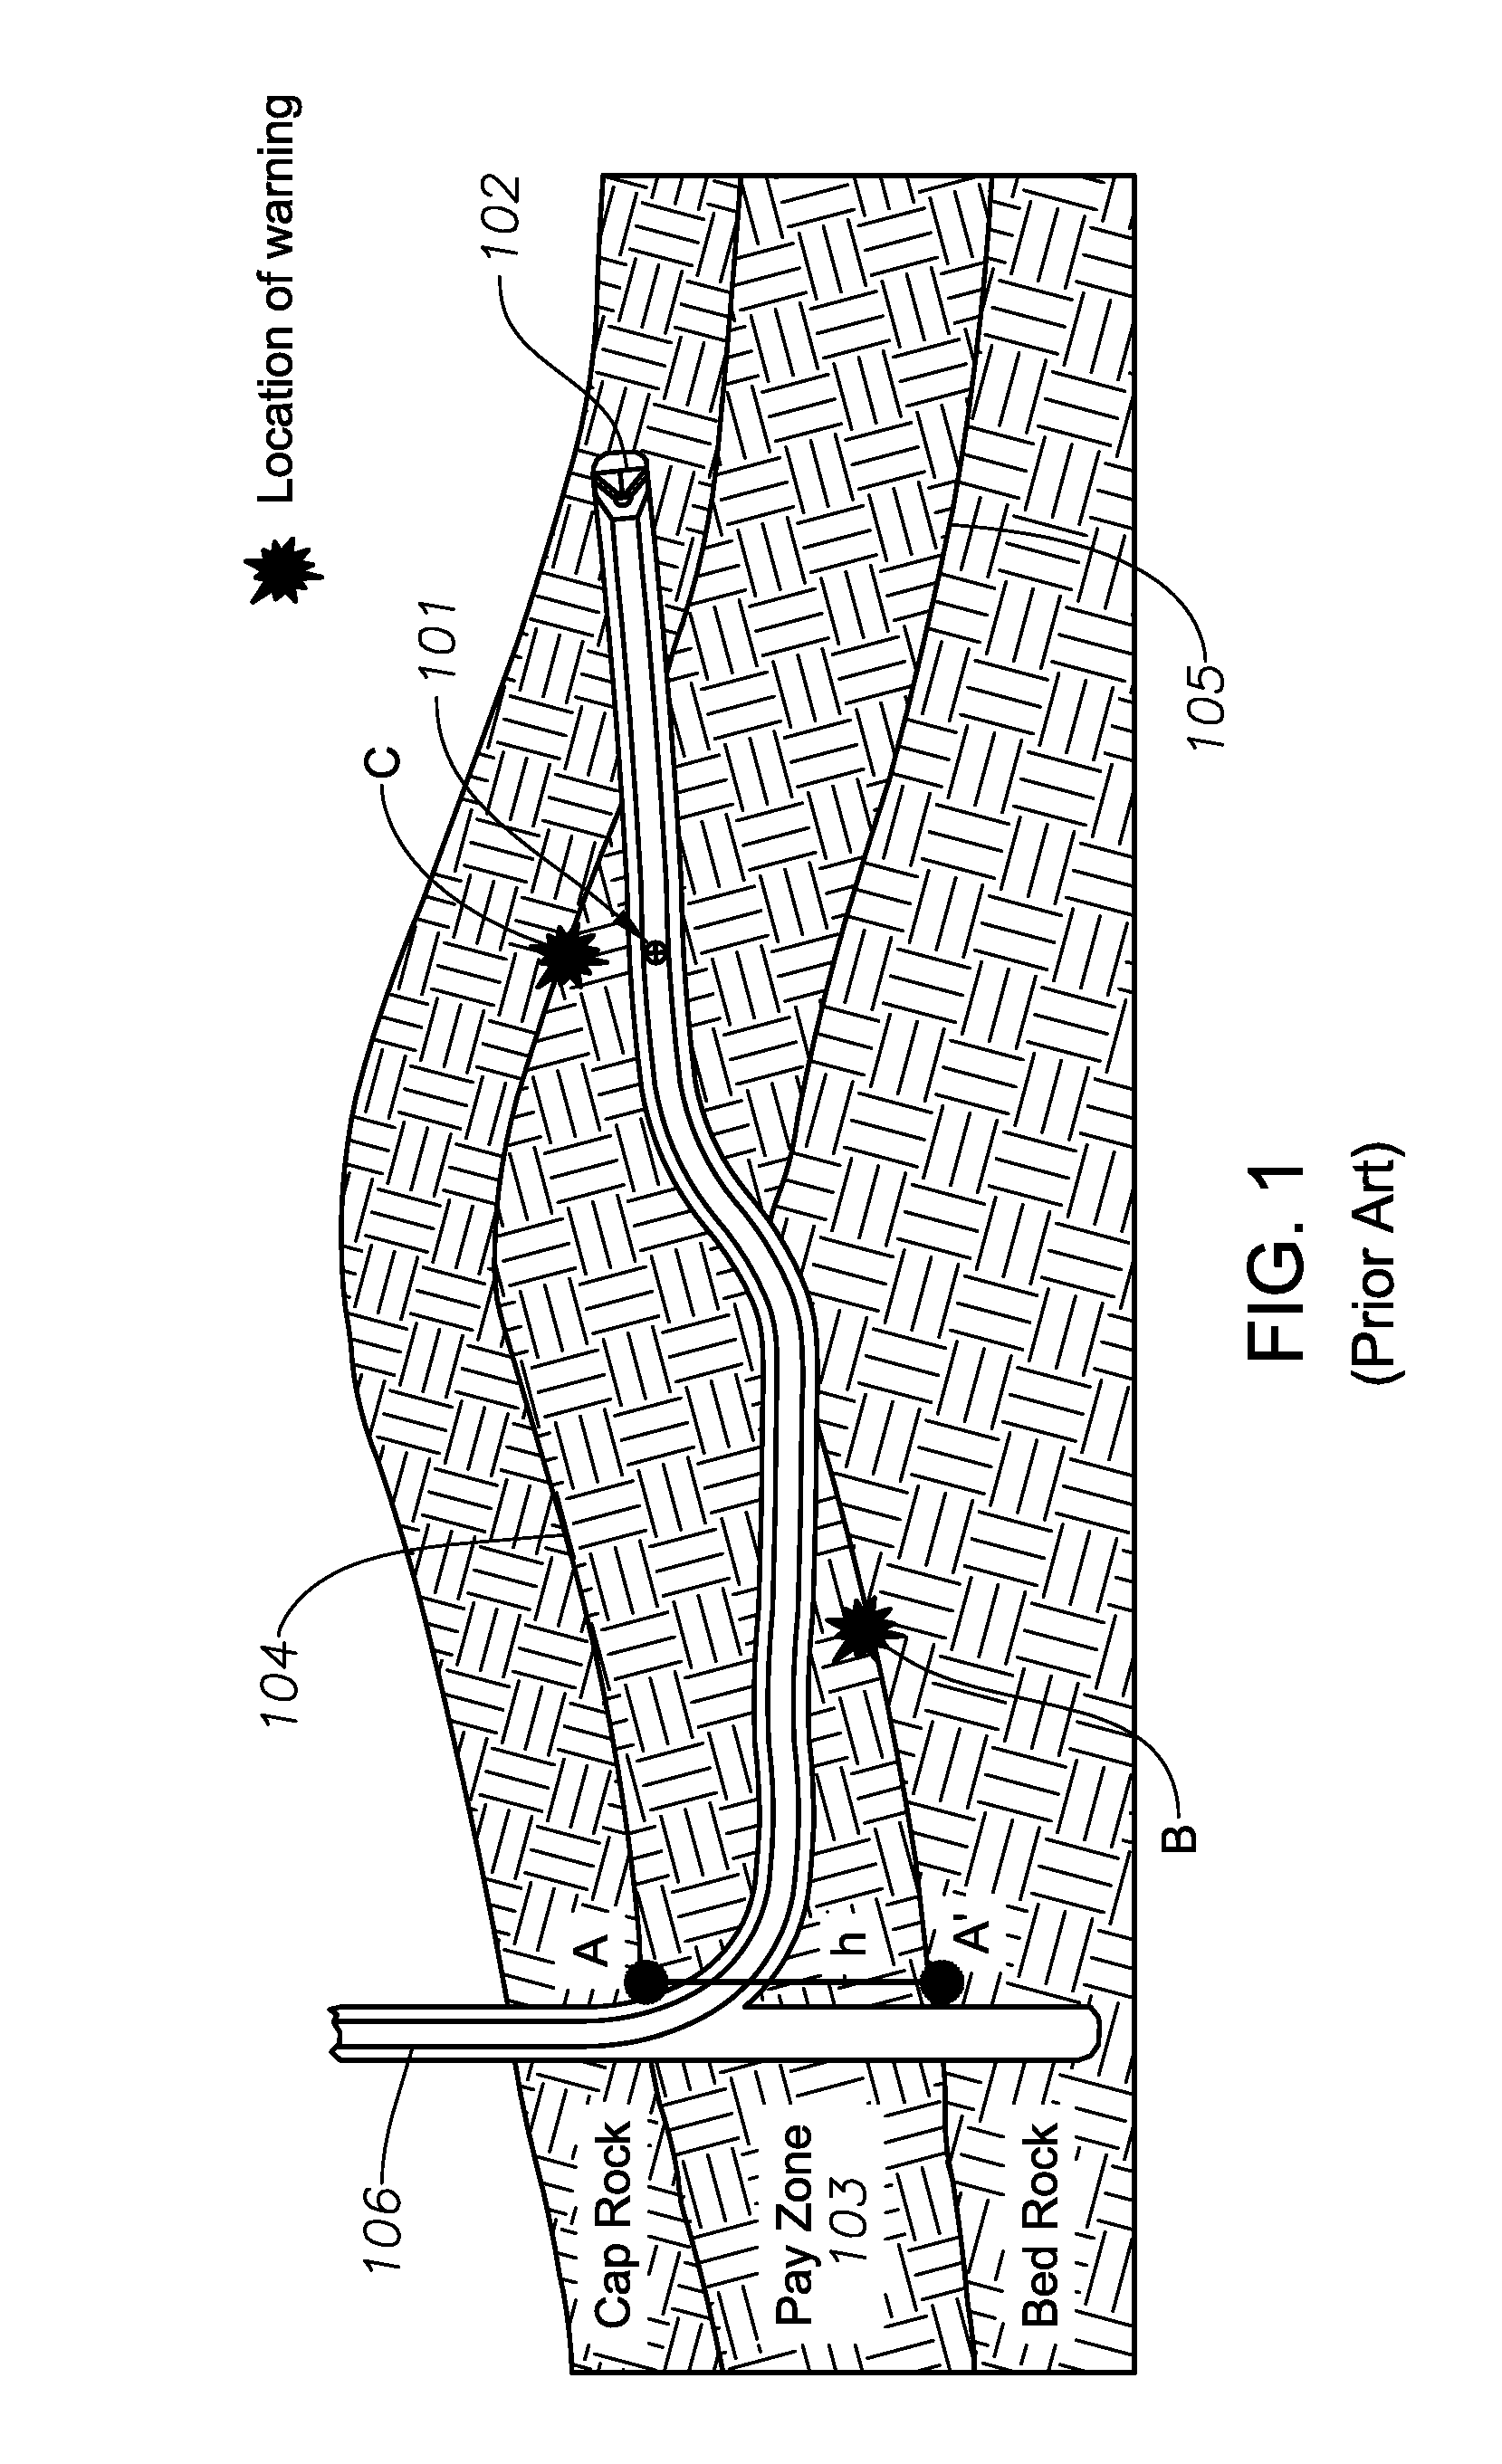 Methods For Geosteering A Drill Bit In Real Time Using Drilling Acoustic Signals